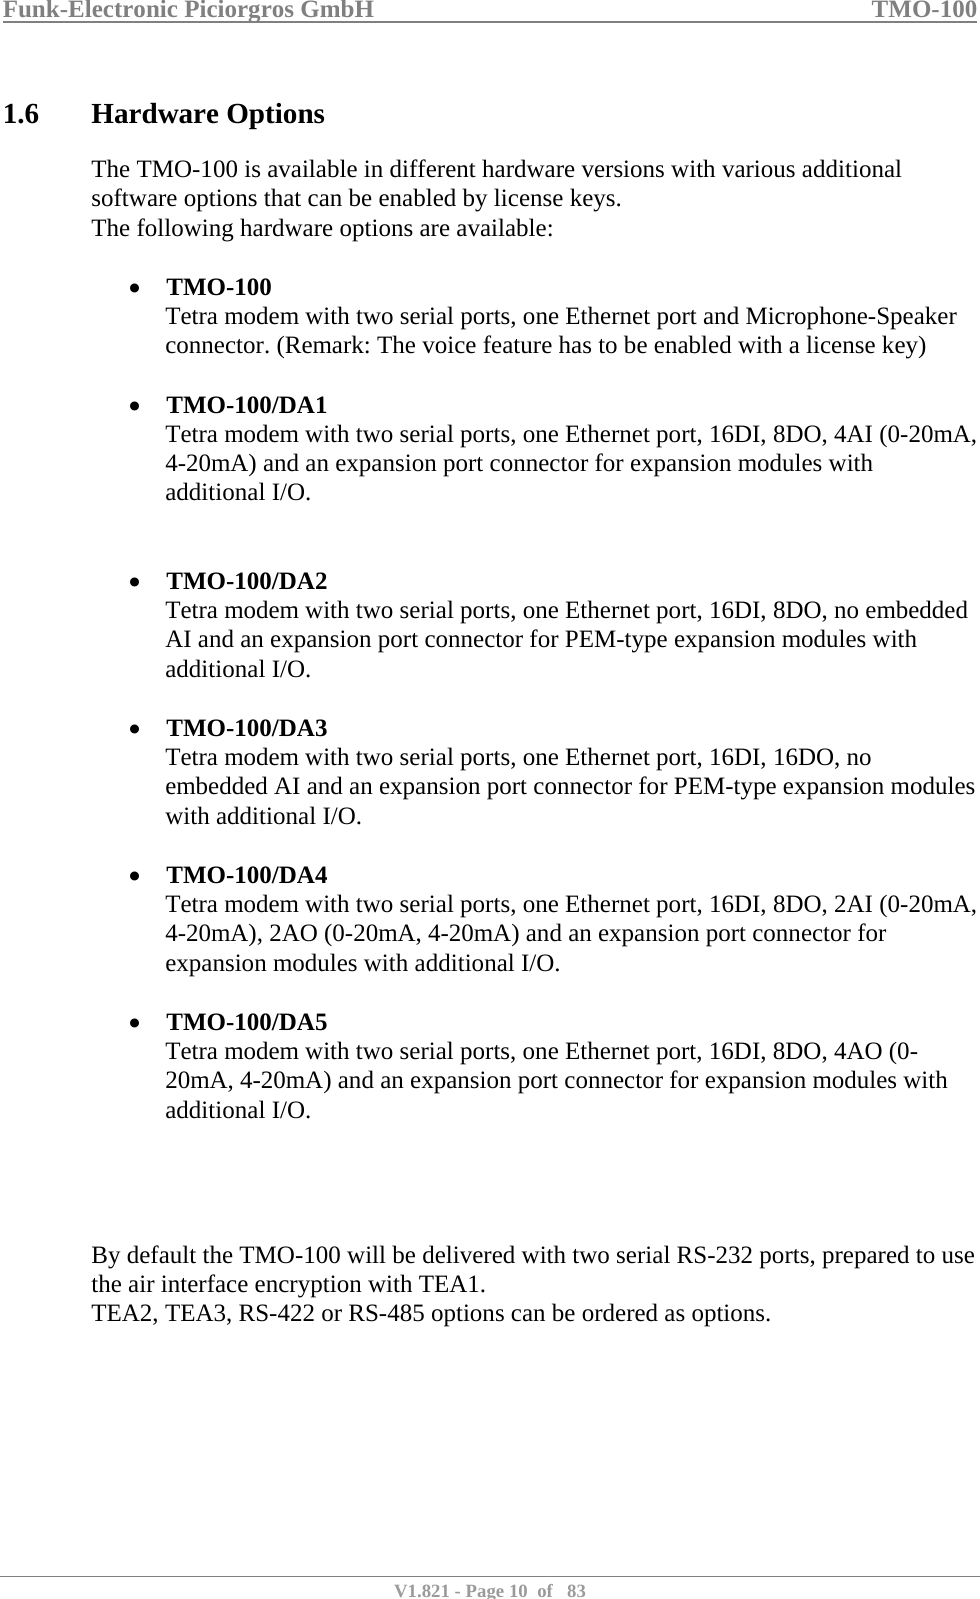 Funk-Electronic Piciorgros GmbH   TMO-100   V1.821 - Page 10  of   83   1.6 Hardware Options The TMO-100 is available in different hardware versions with various additional software options that can be enabled by license keys. The following hardware options are available:  • TMO-100 Tetra modem with two serial ports, one Ethernet port and Microphone-Speaker connector. (Remark: The voice feature has to be enabled with a license key)  • TMO-100/DA1 Tetra modem with two serial ports, one Ethernet port, 16DI, 8DO, 4AI (0-20mA, 4-20mA) and an expansion port connector for expansion modules with additional I/O.   • TMO-100/DA2 Tetra modem with two serial ports, one Ethernet port, 16DI, 8DO, no embedded AI and an expansion port connector for PEM-type expansion modules with additional I/O.  • TMO-100/DA3 Tetra modem with two serial ports, one Ethernet port, 16DI, 16DO, no embedded AI and an expansion port connector for PEM-type expansion modules with additional I/O.  • TMO-100/DA4 Tetra modem with two serial ports, one Ethernet port, 16DI, 8DO, 2AI (0-20mA, 4-20mA), 2AO (0-20mA, 4-20mA) and an expansion port connector for expansion modules with additional I/O.  • TMO-100/DA5 Tetra modem with two serial ports, one Ethernet port, 16DI, 8DO, 4AO (0-20mA, 4-20mA) and an expansion port connector for expansion modules with additional I/O.     By default the TMO-100 will be delivered with two serial RS-232 ports, prepared to use the air interface encryption with TEA1.  TEA2, TEA3, RS-422 or RS-485 options can be ordered as options.    